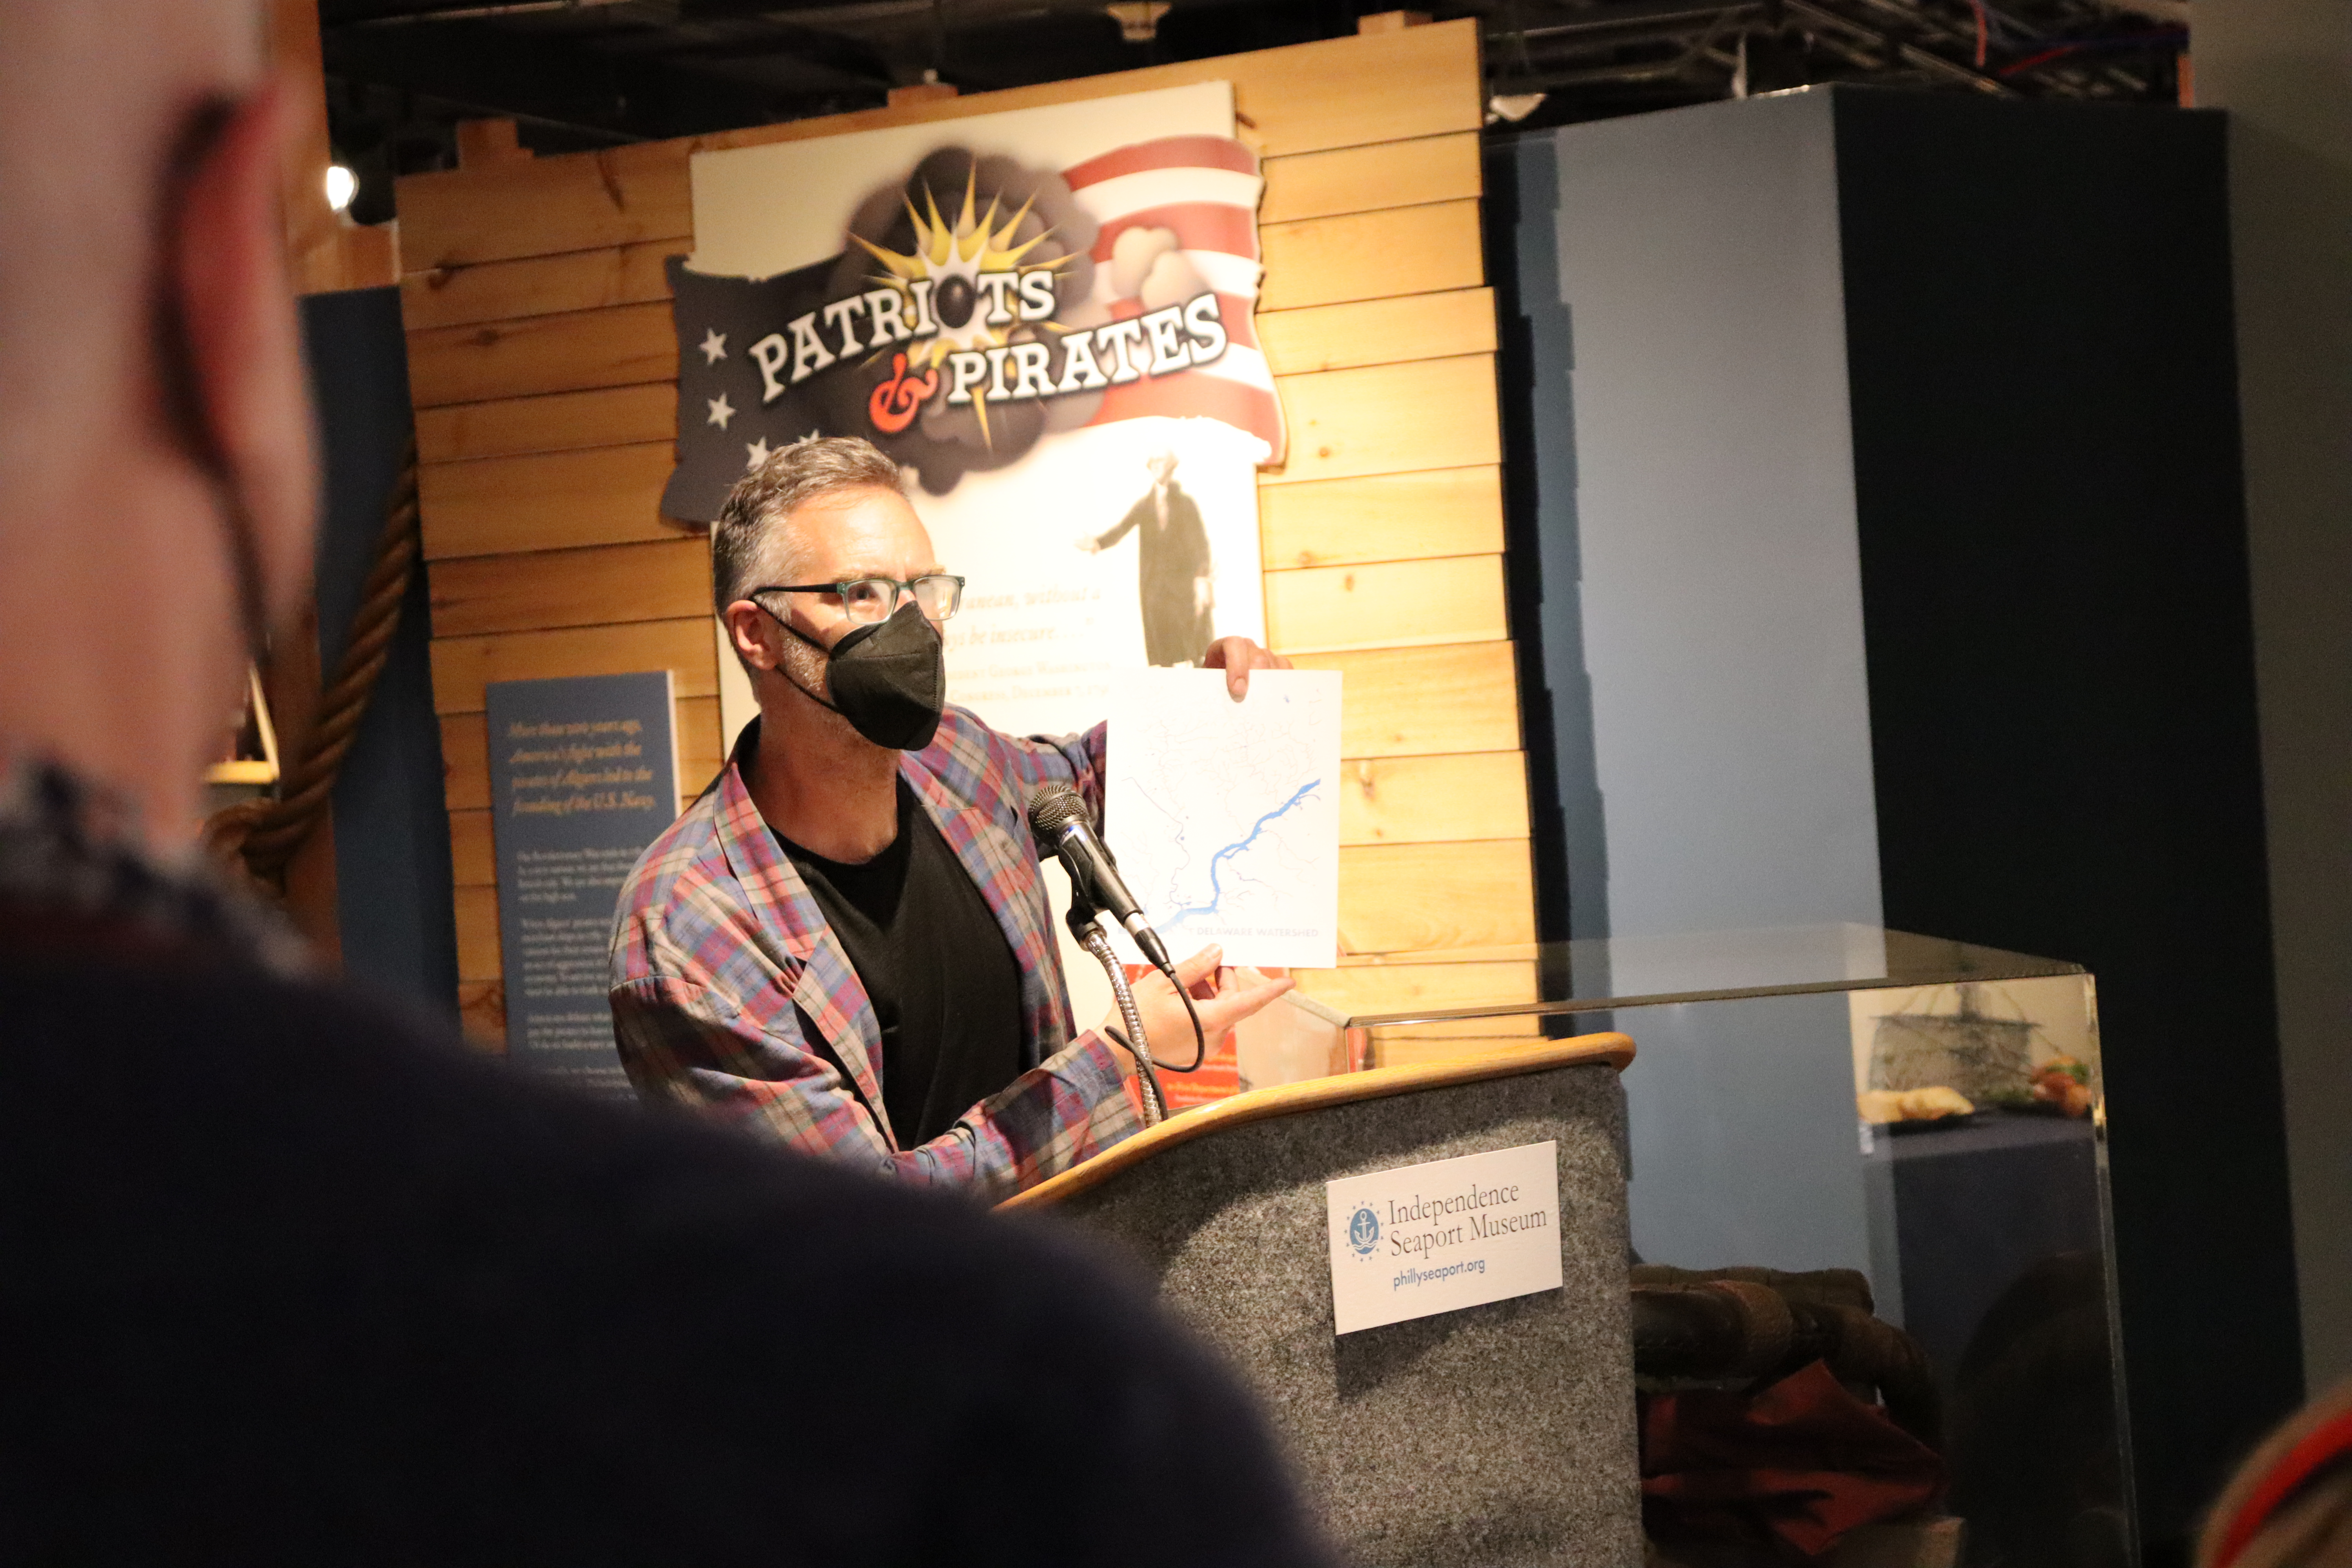 A man in a black face mask holds up a map of a river while giving remarks at podium in a museum gallery.